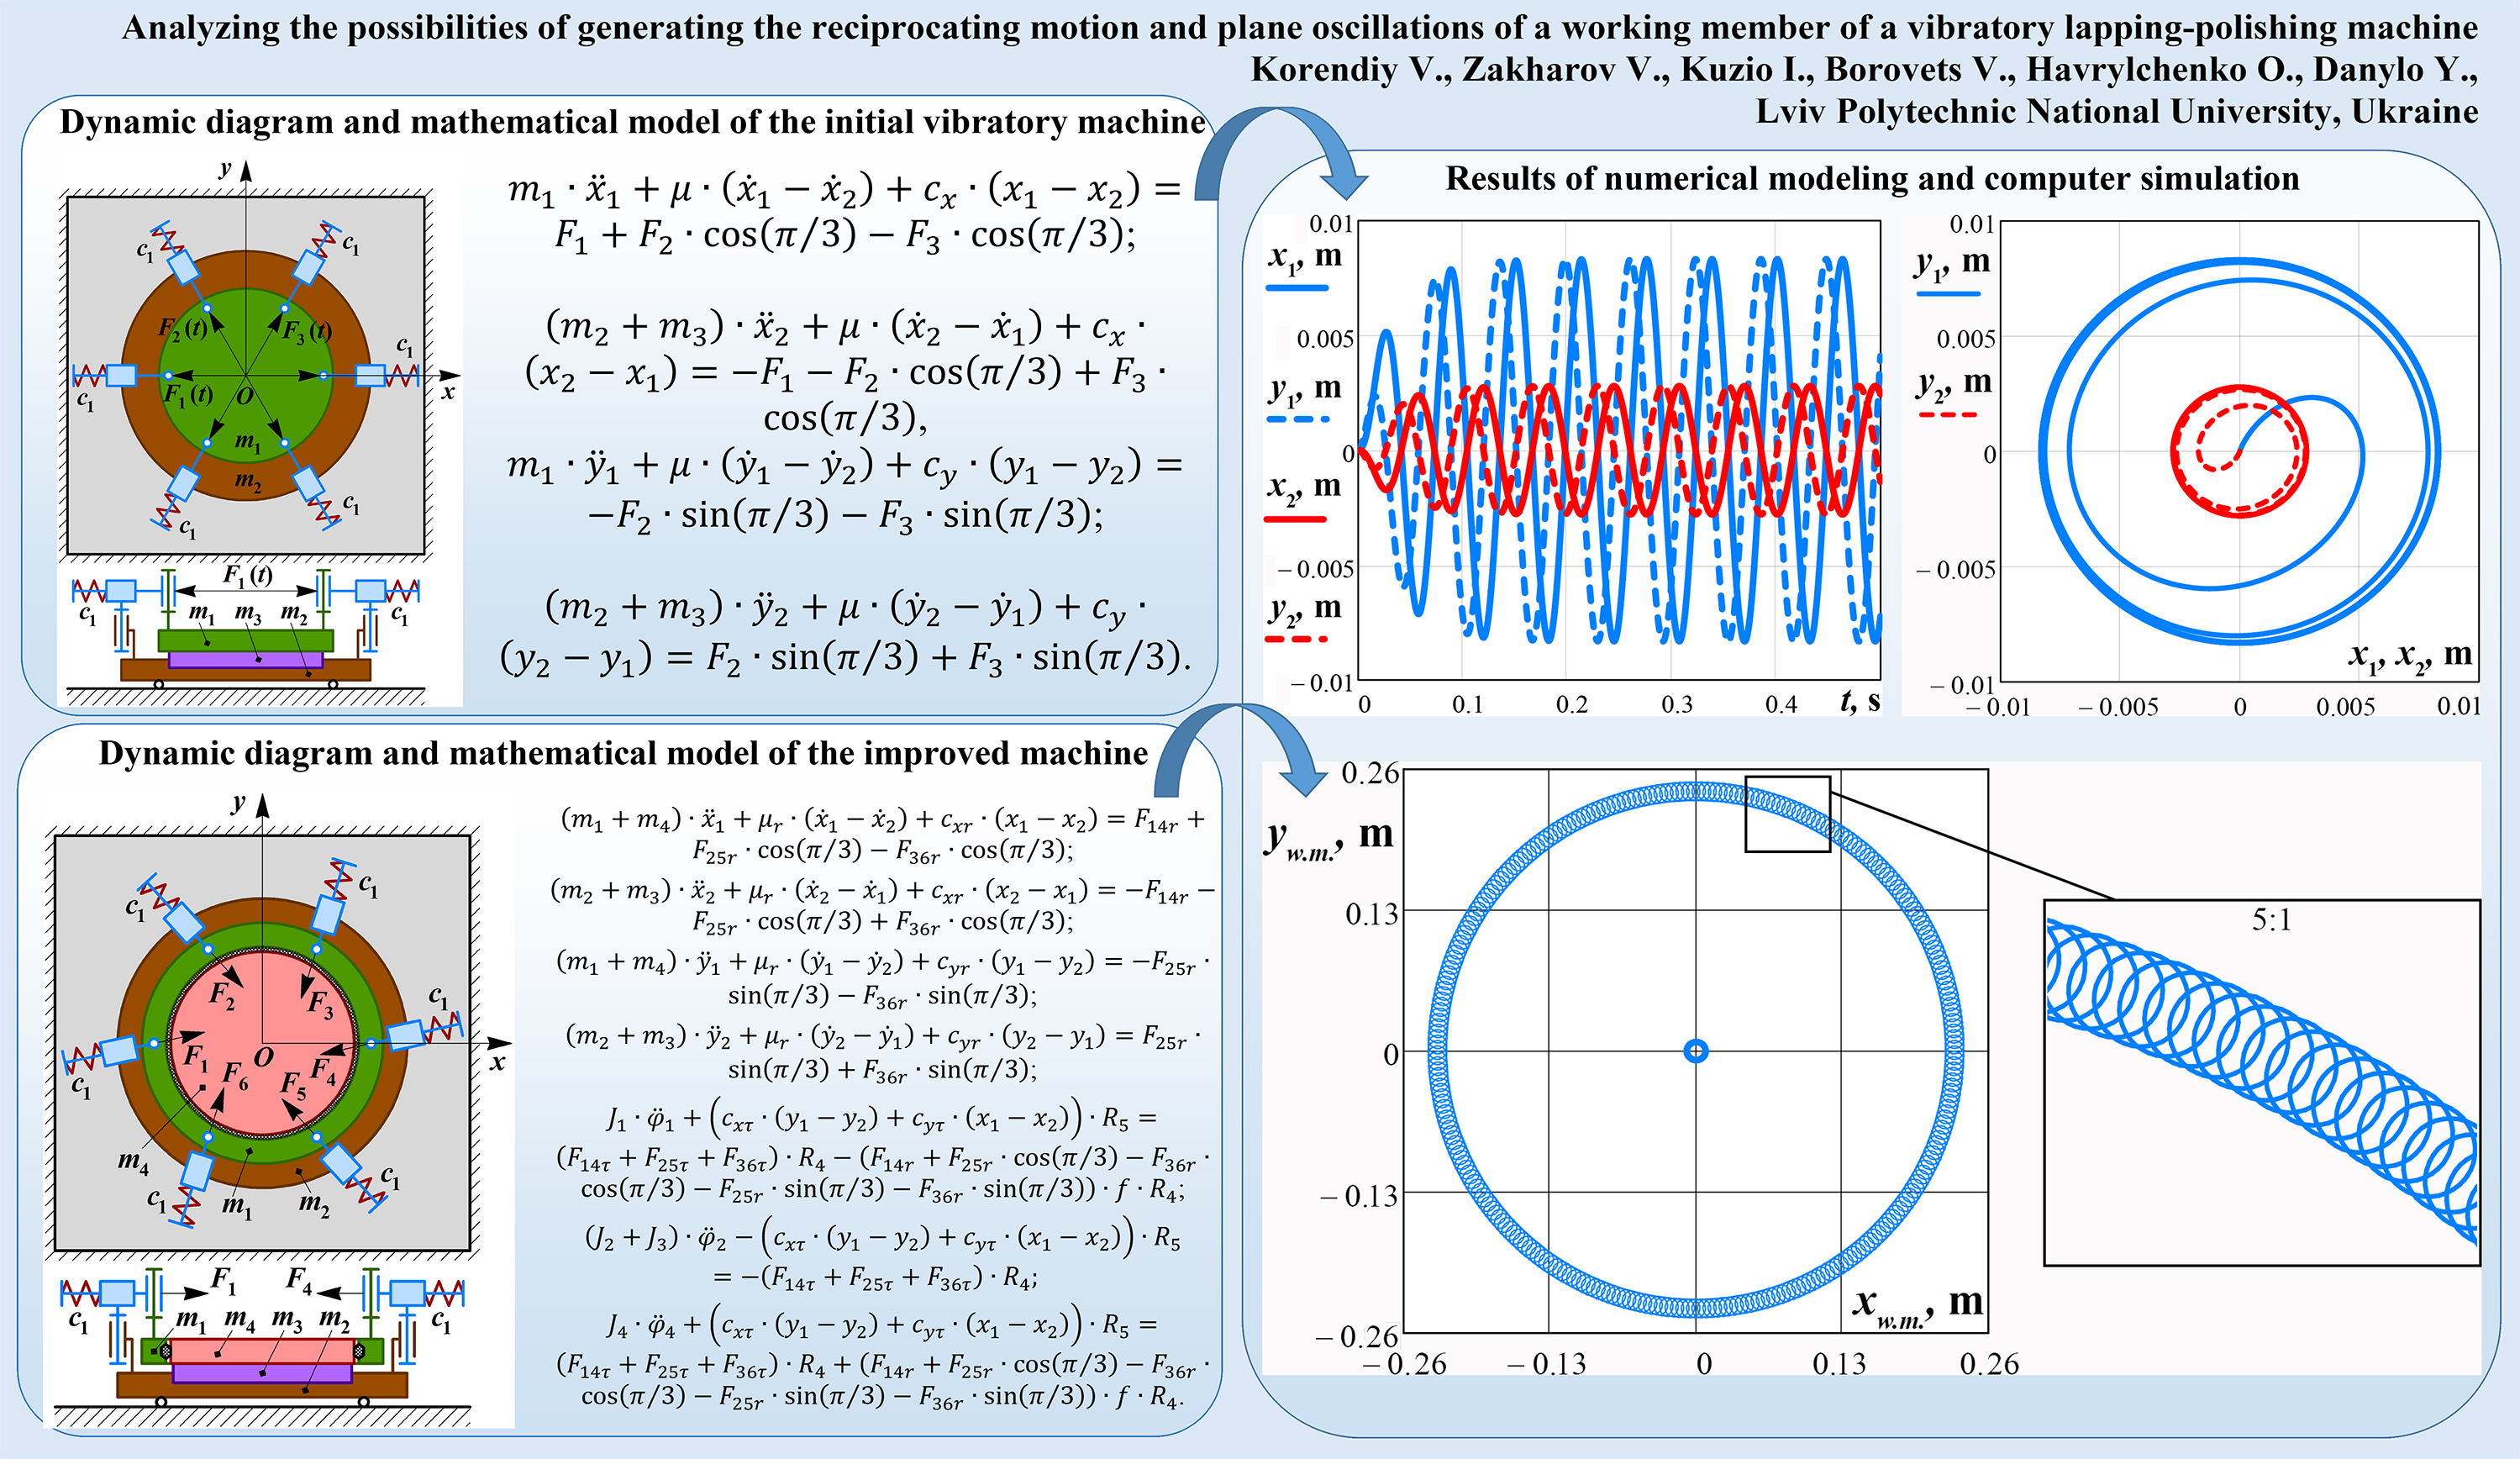 Analyzing the possibilities of generating the reciprocating motion and plane oscillations of a working member of a vibratory lapping-polishing machine